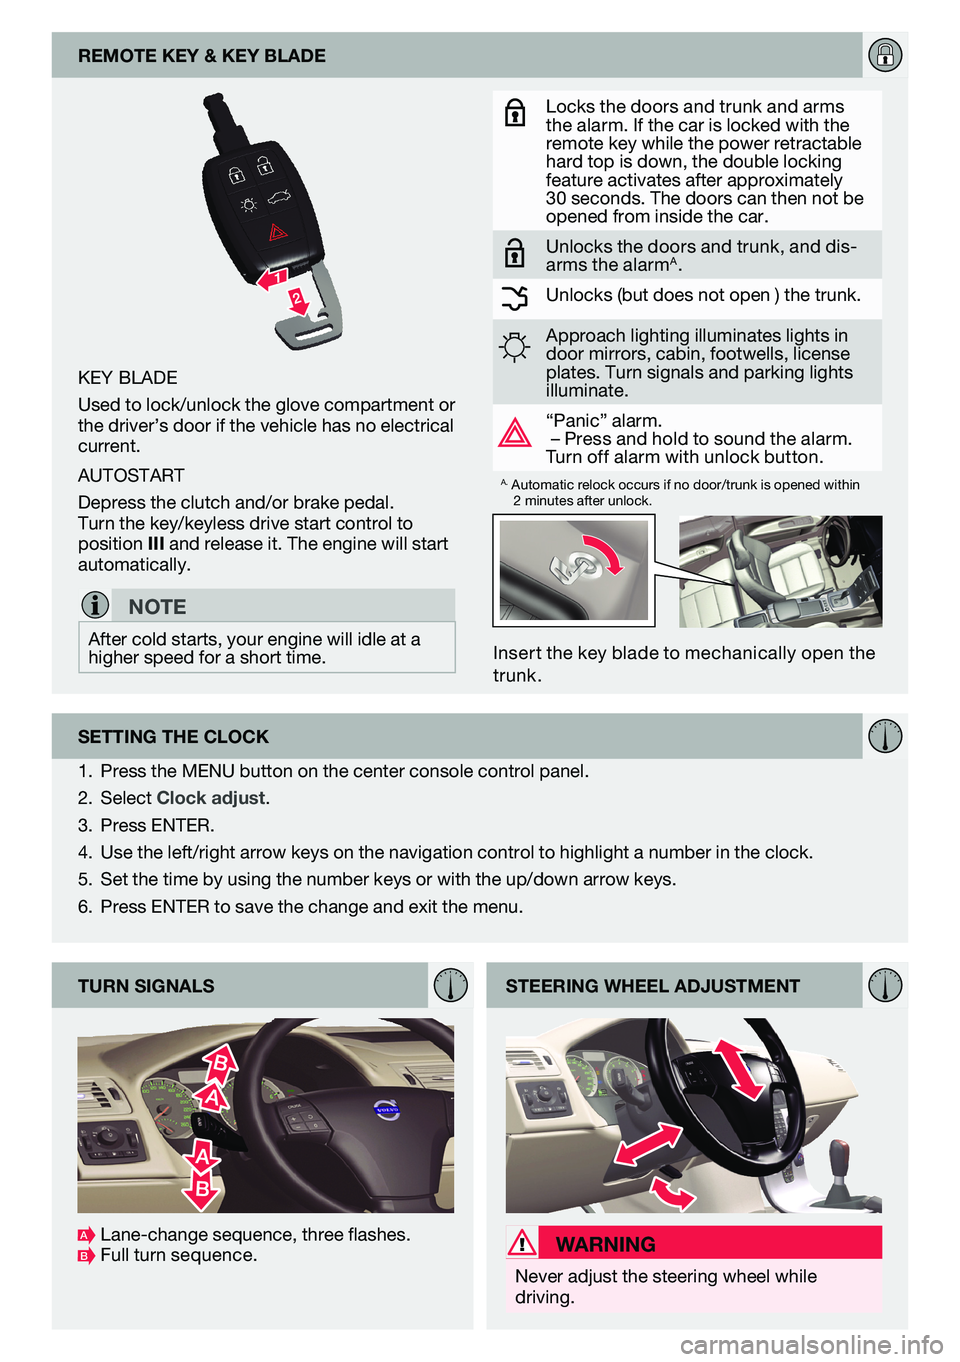 VOLVO C70 2013  Quick Guide Insert the key blade to mechanically open the 
trunk.
key blade
Used to lock/unlock the glove compartment or 
the driver’s door if the vehicle has no electrical 
current.
aUtostart
depress the clutc